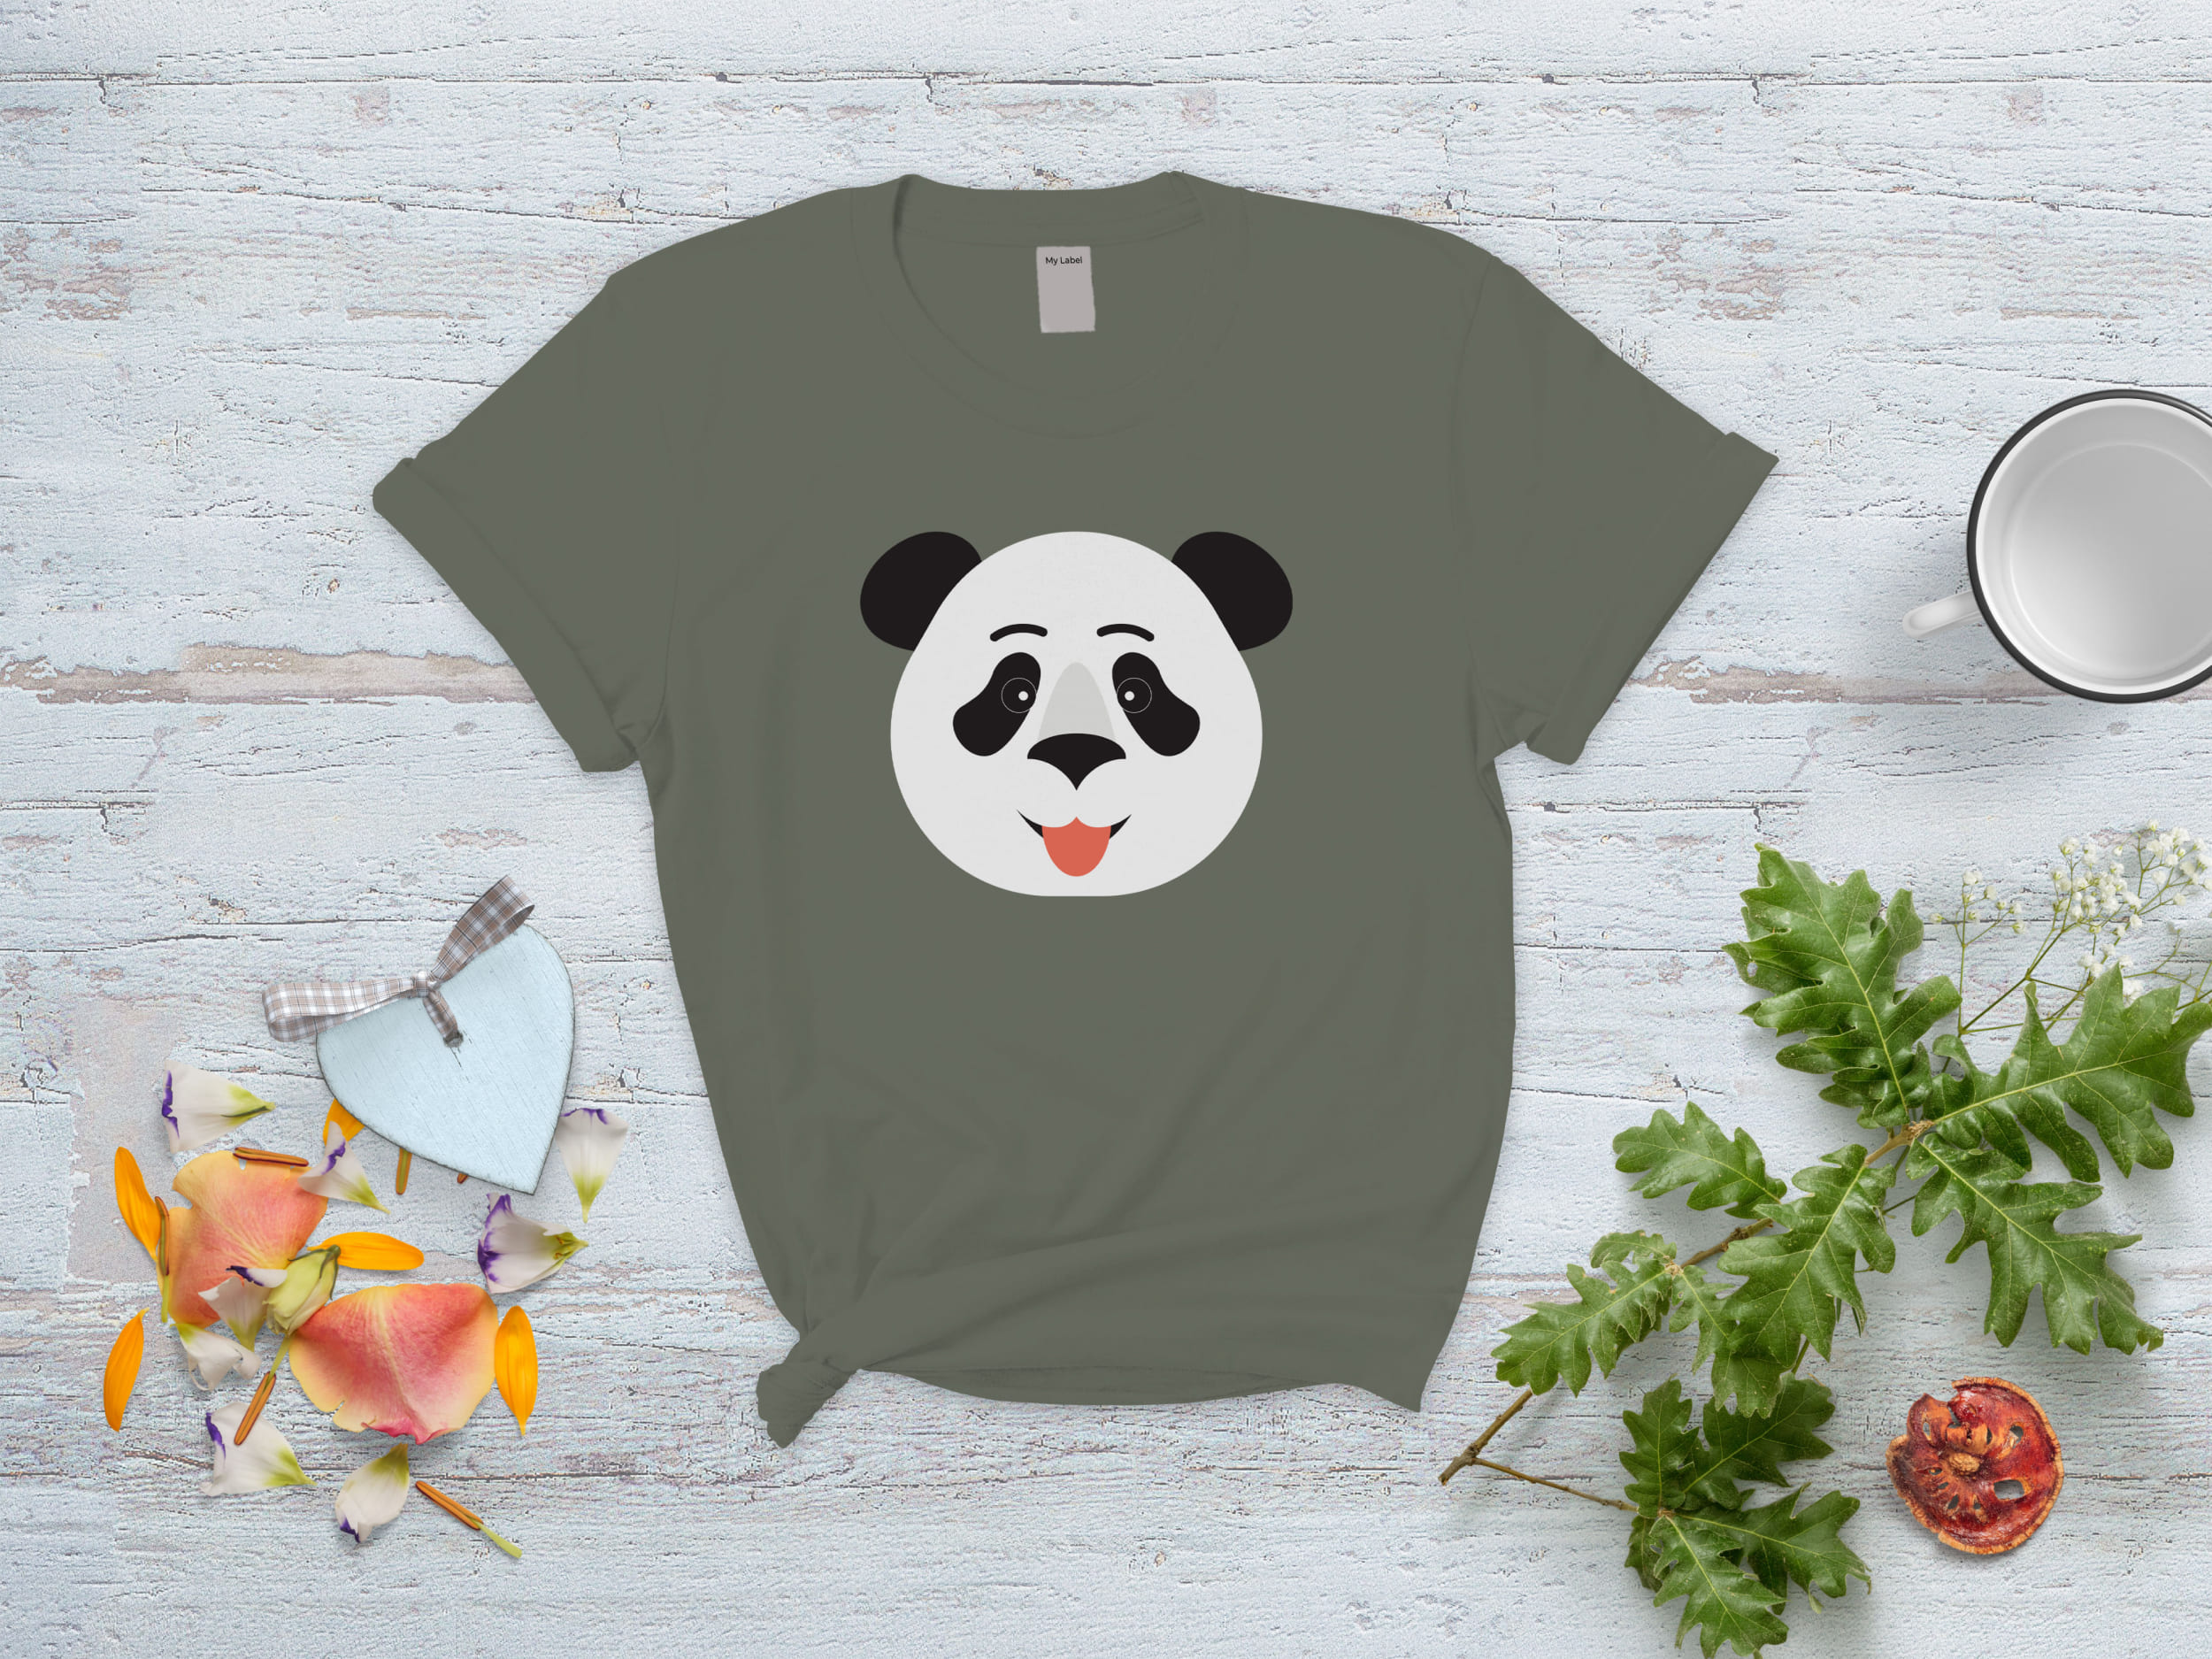 Gray t-shirt with a panda funny face on a gray and white background with various objects.